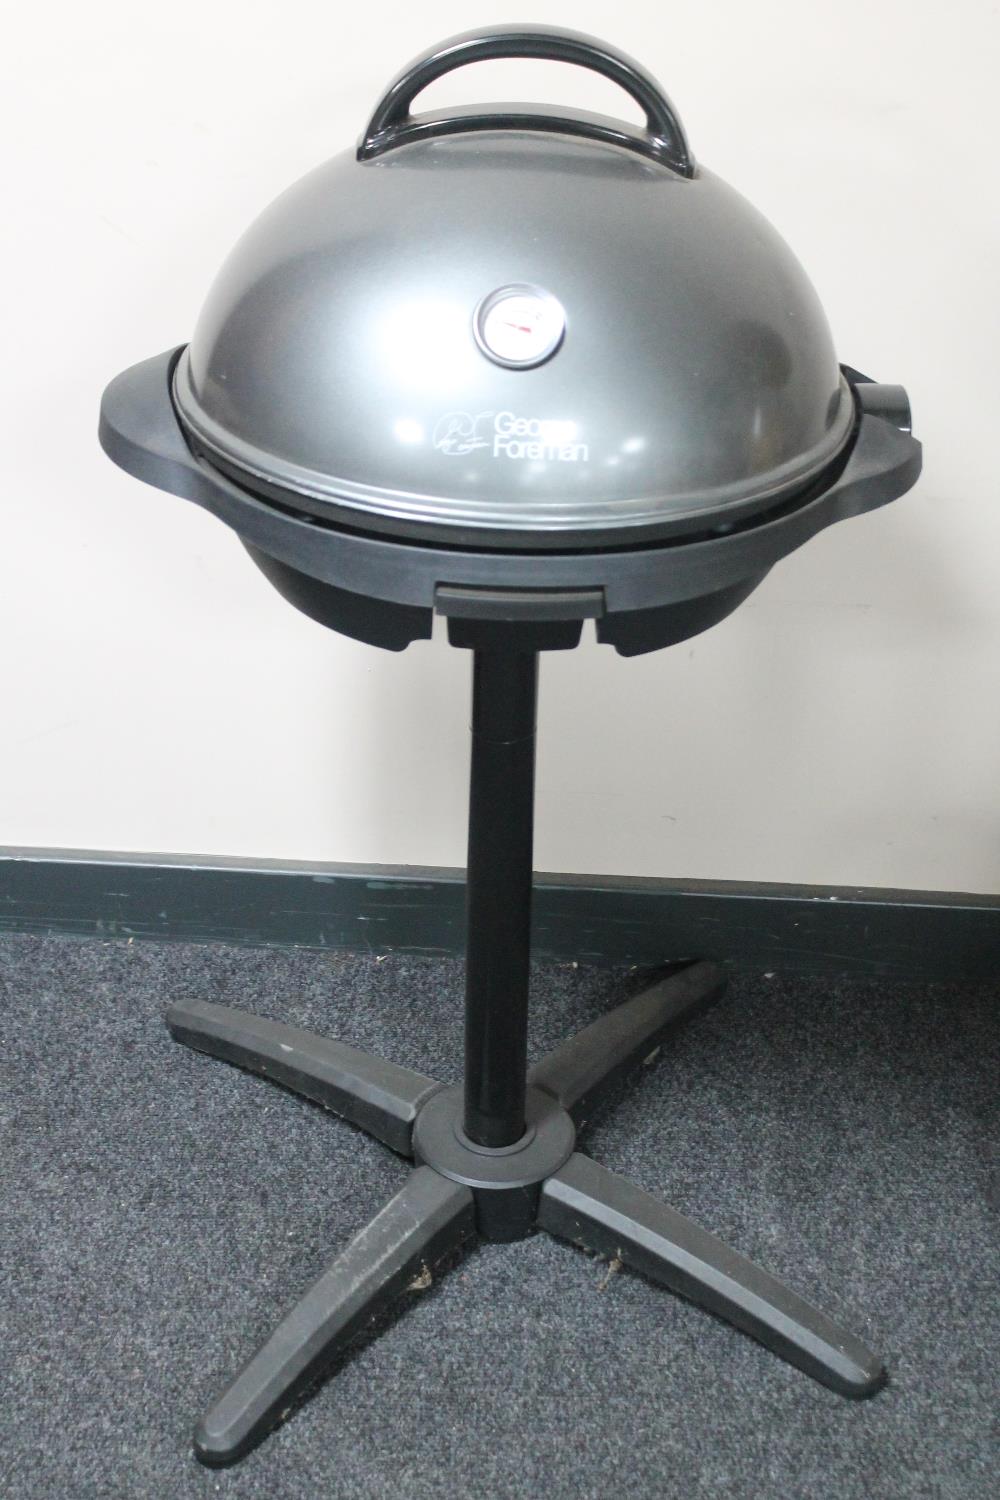 A George Foreman outdoor grill